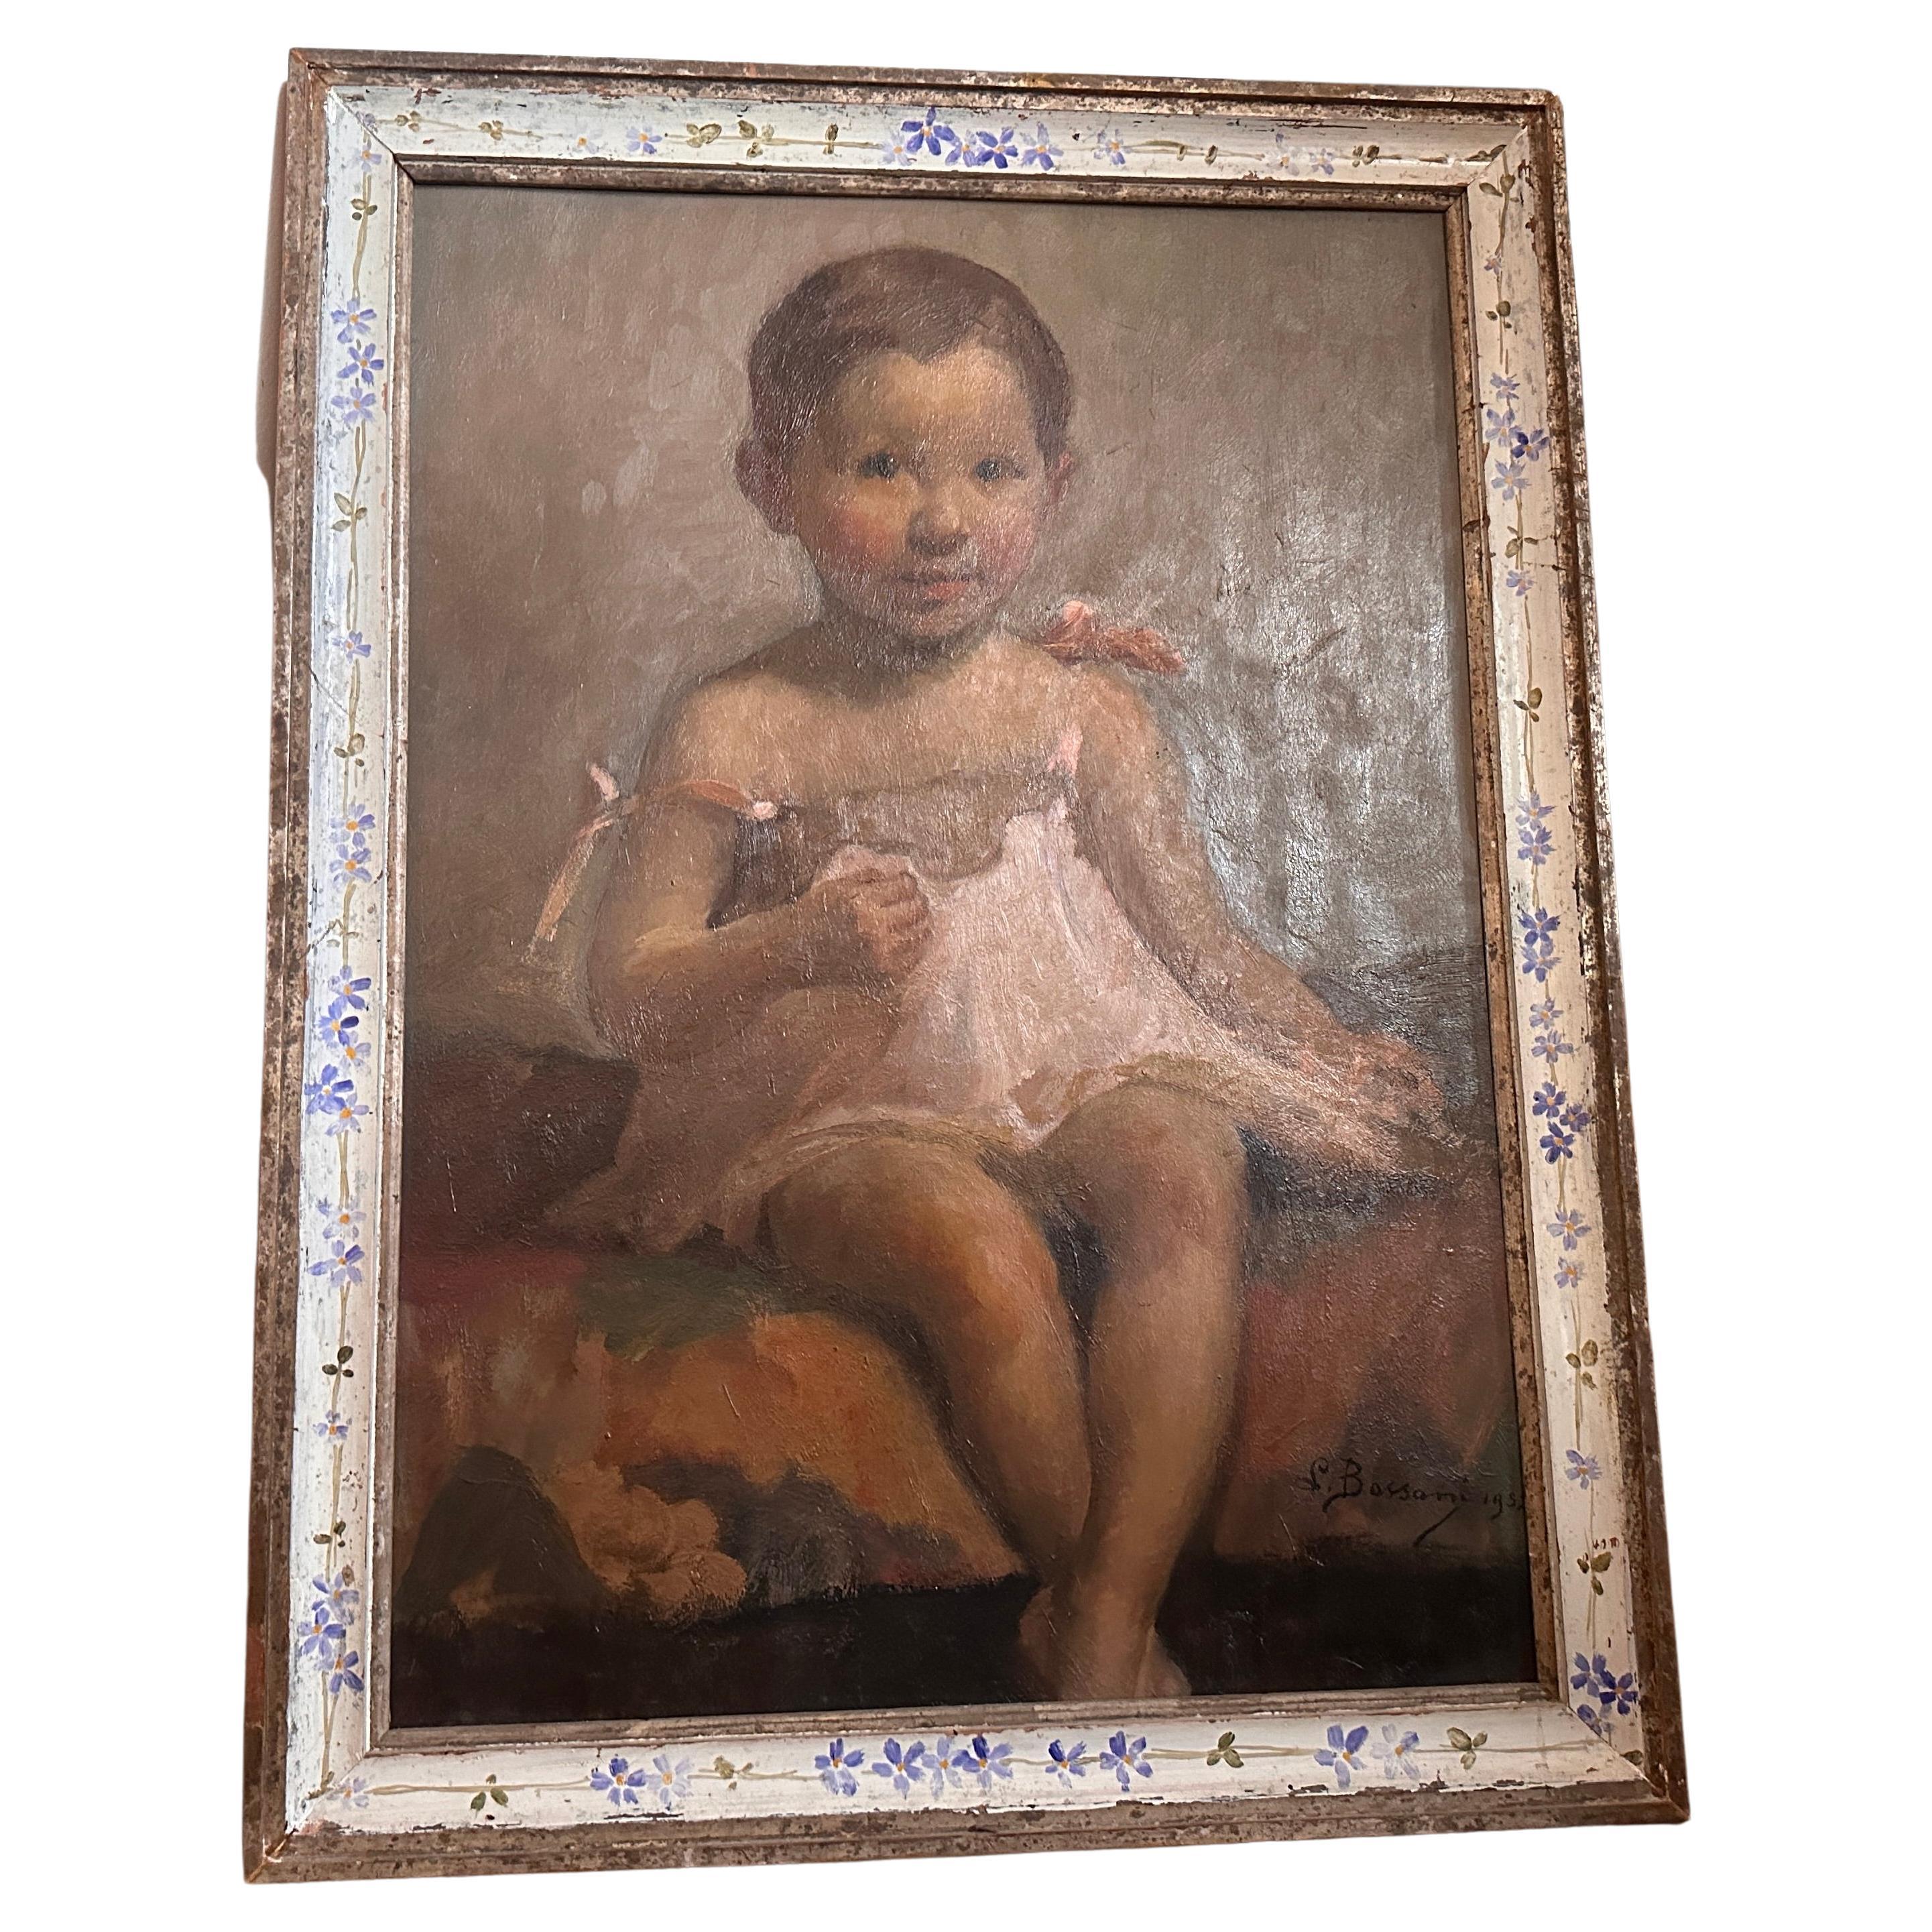 A 1952 Italian Portrait of a Little Girl Painted by Lucia Bassani